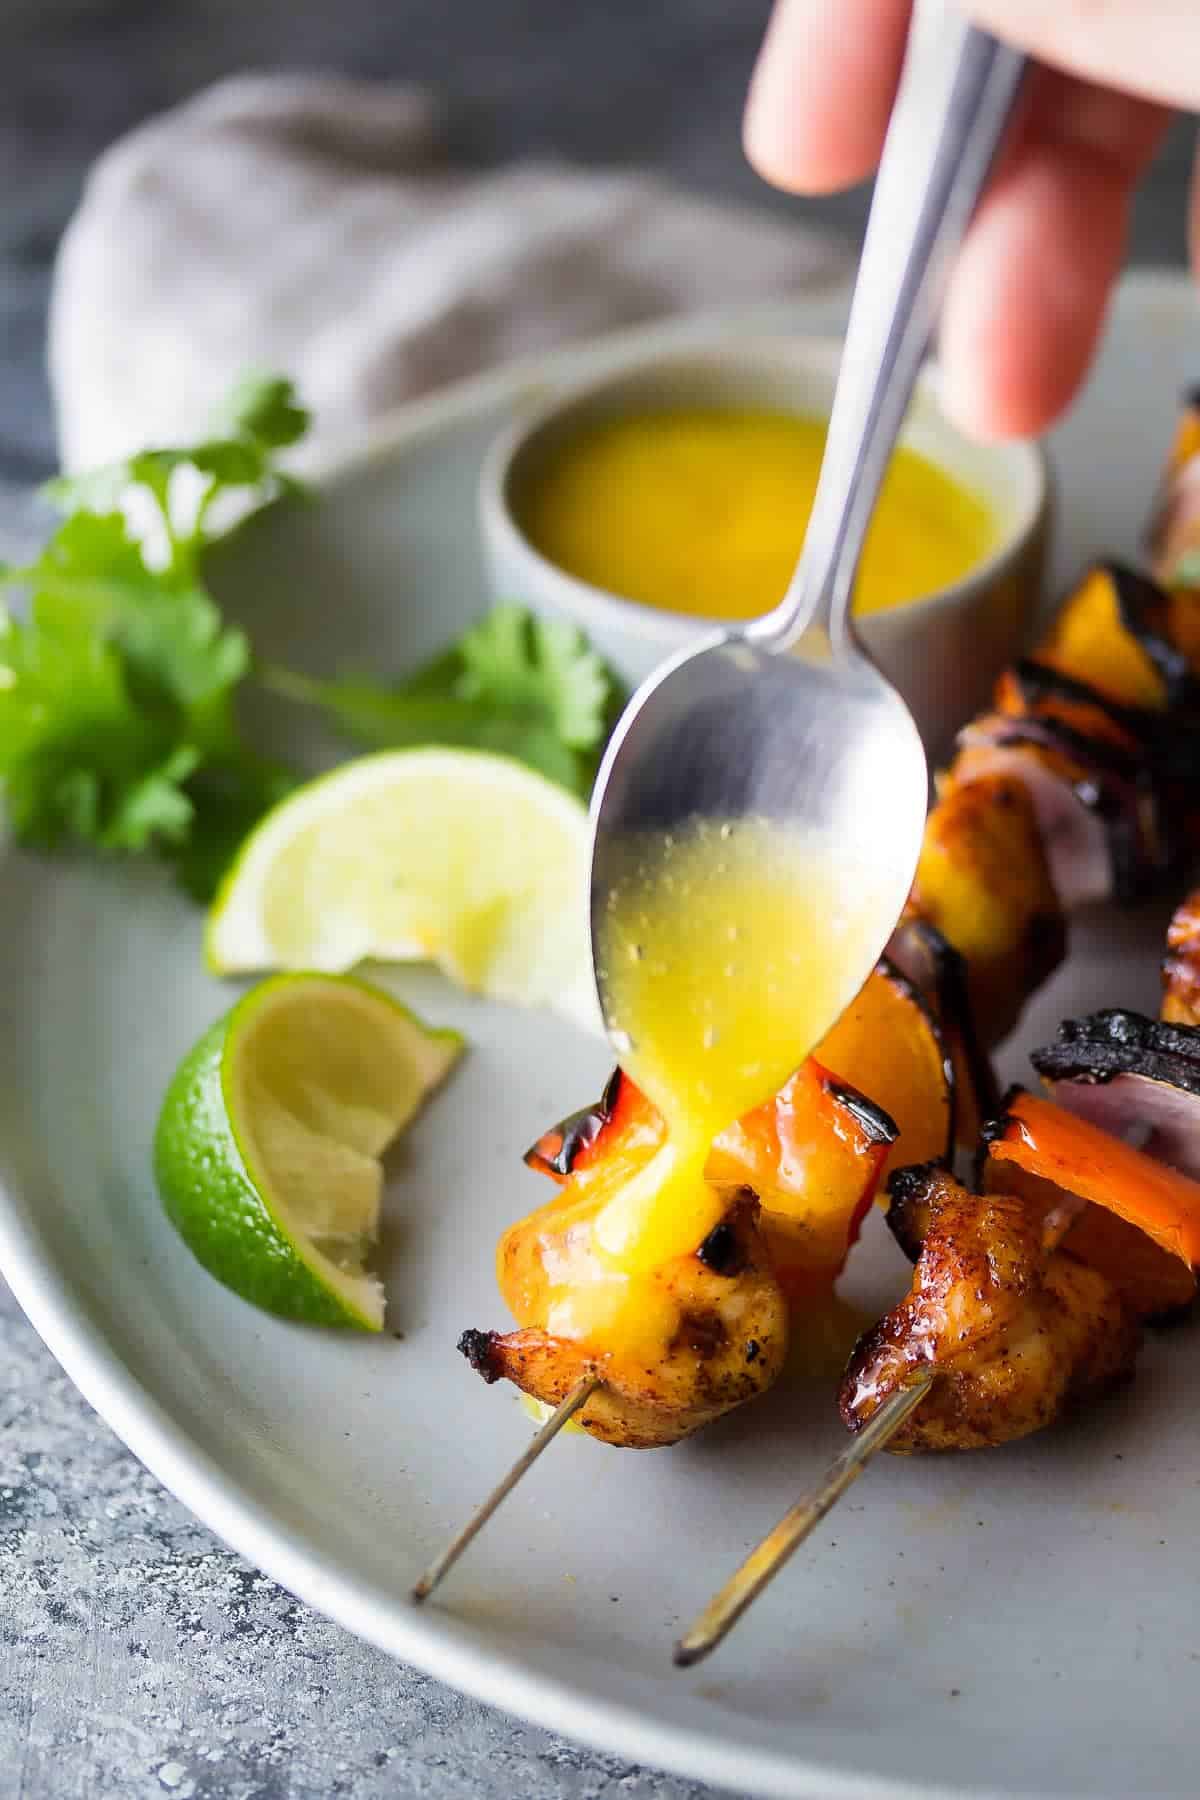 Chili Lime Chicken Skewers with Mango Sauce being drizzled over them